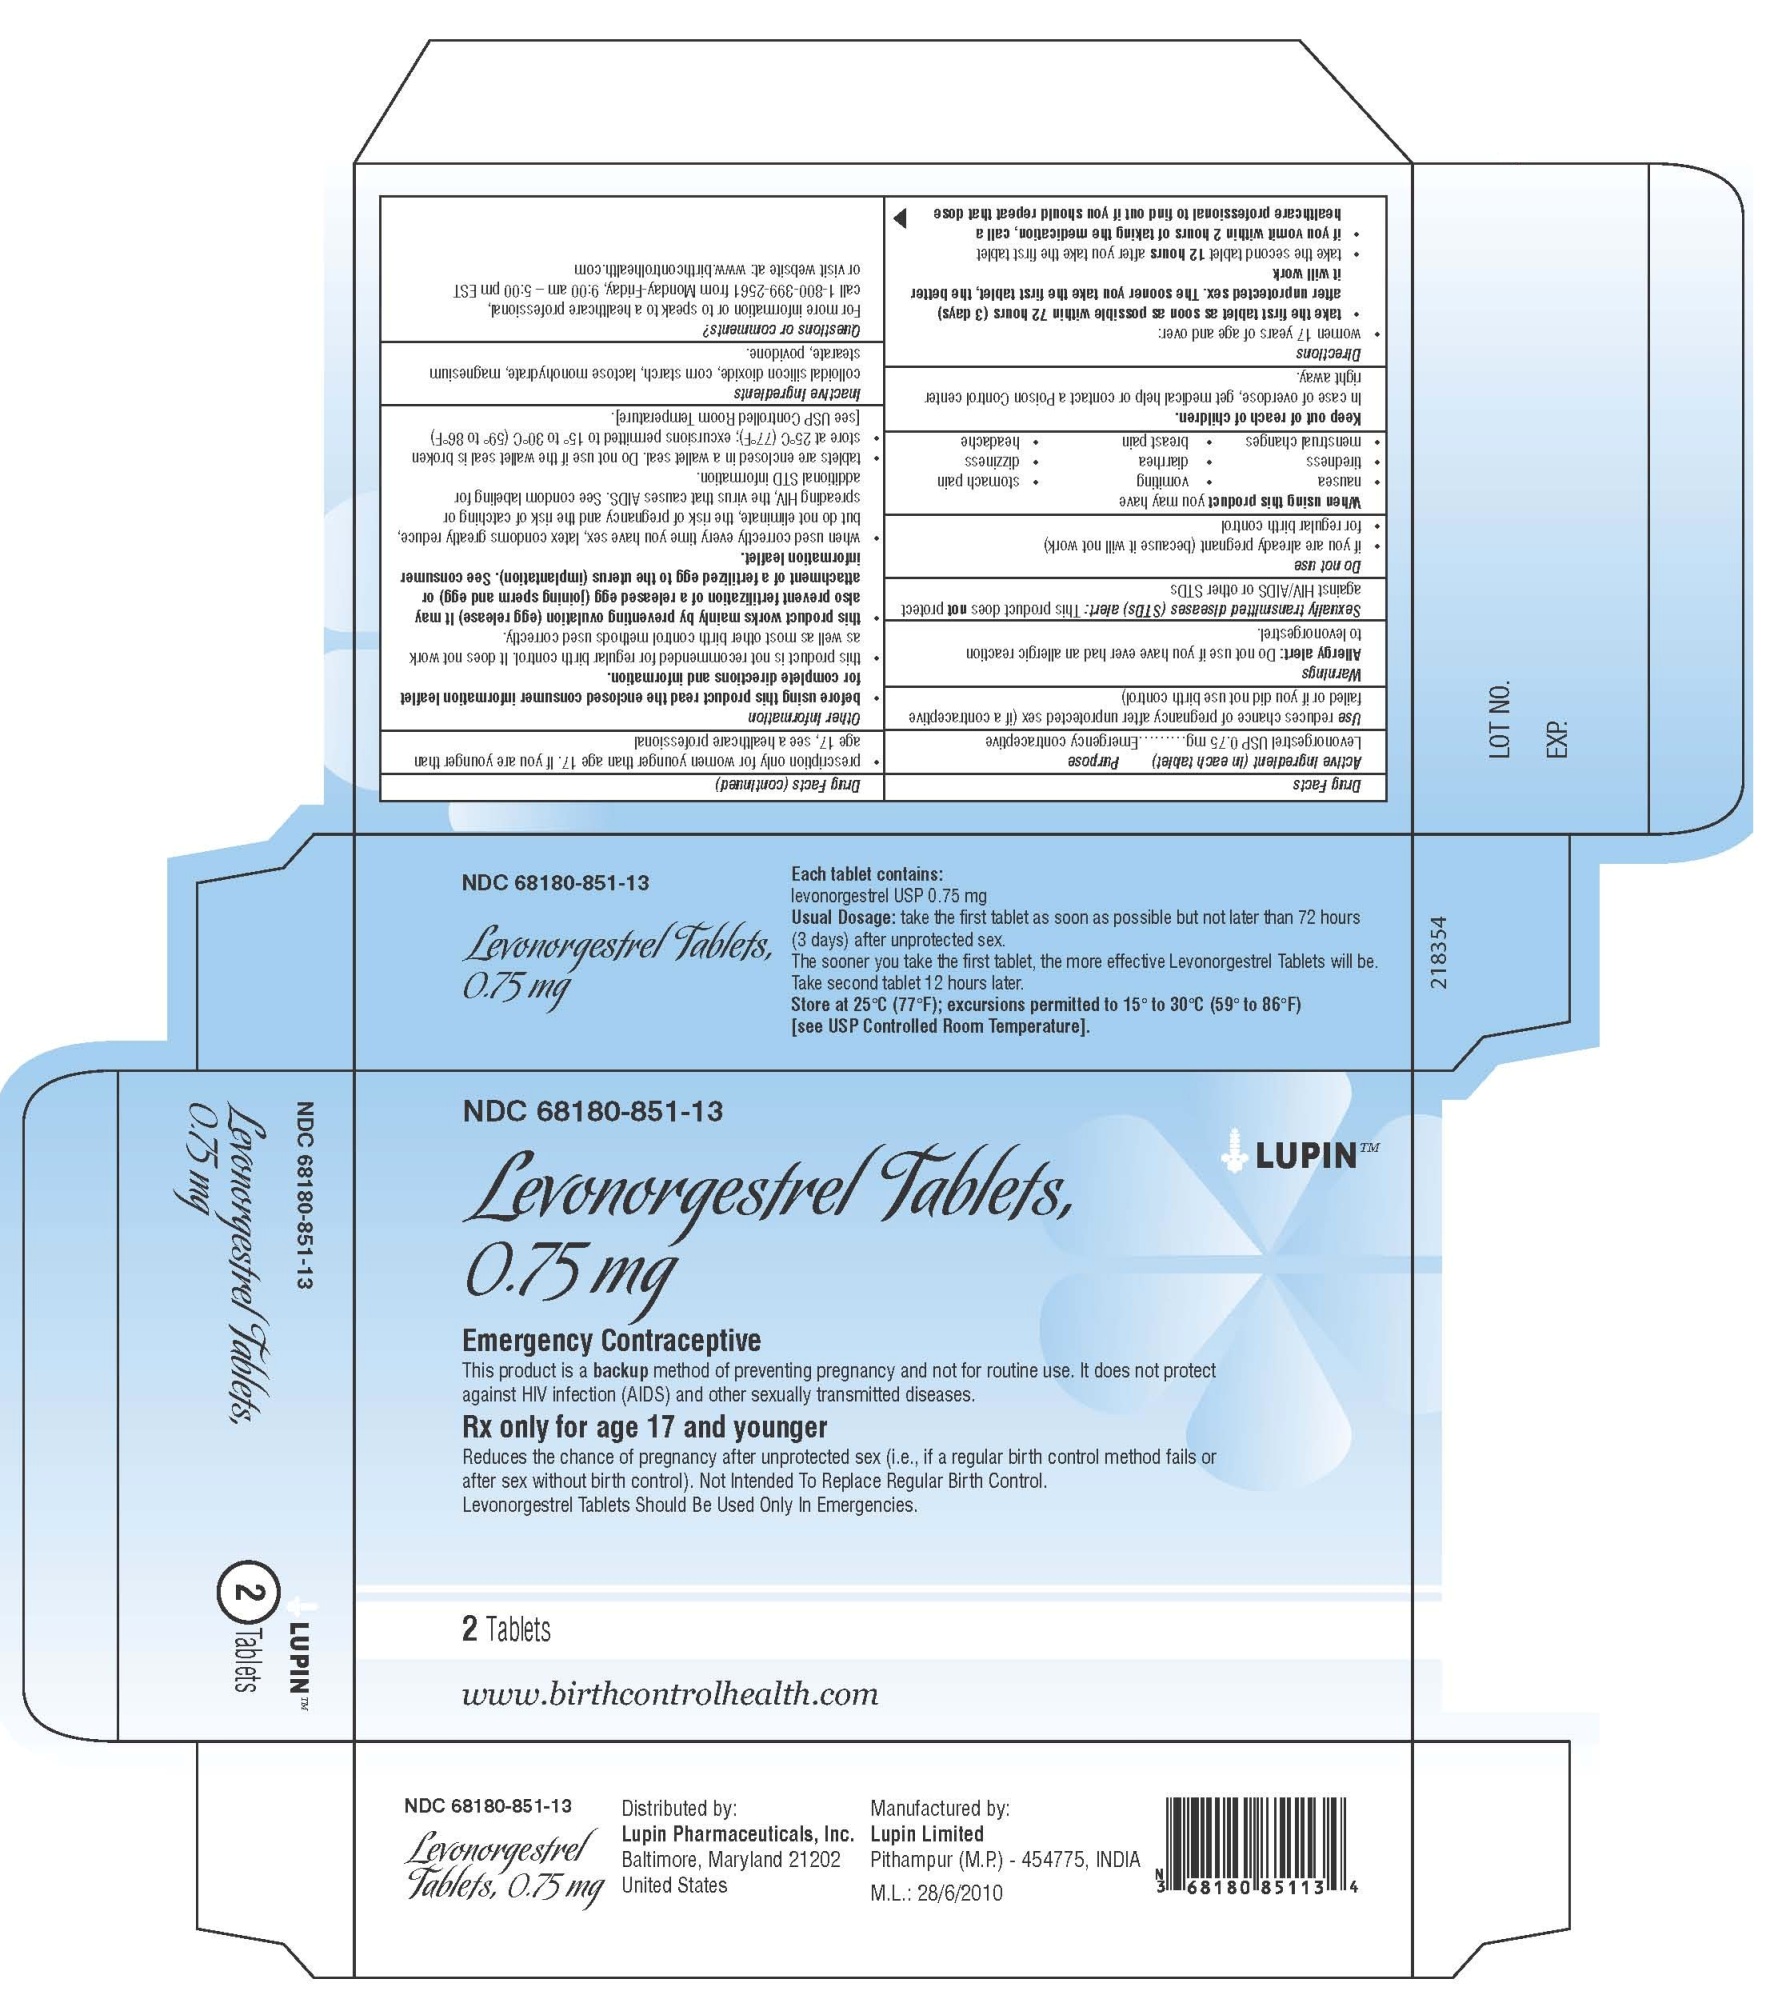 Levonorgestrel Tablets, 0.75 mg
Rx only for age 17 and younger
NDC 68180-851-13
					Carton Label: 2 Tablets